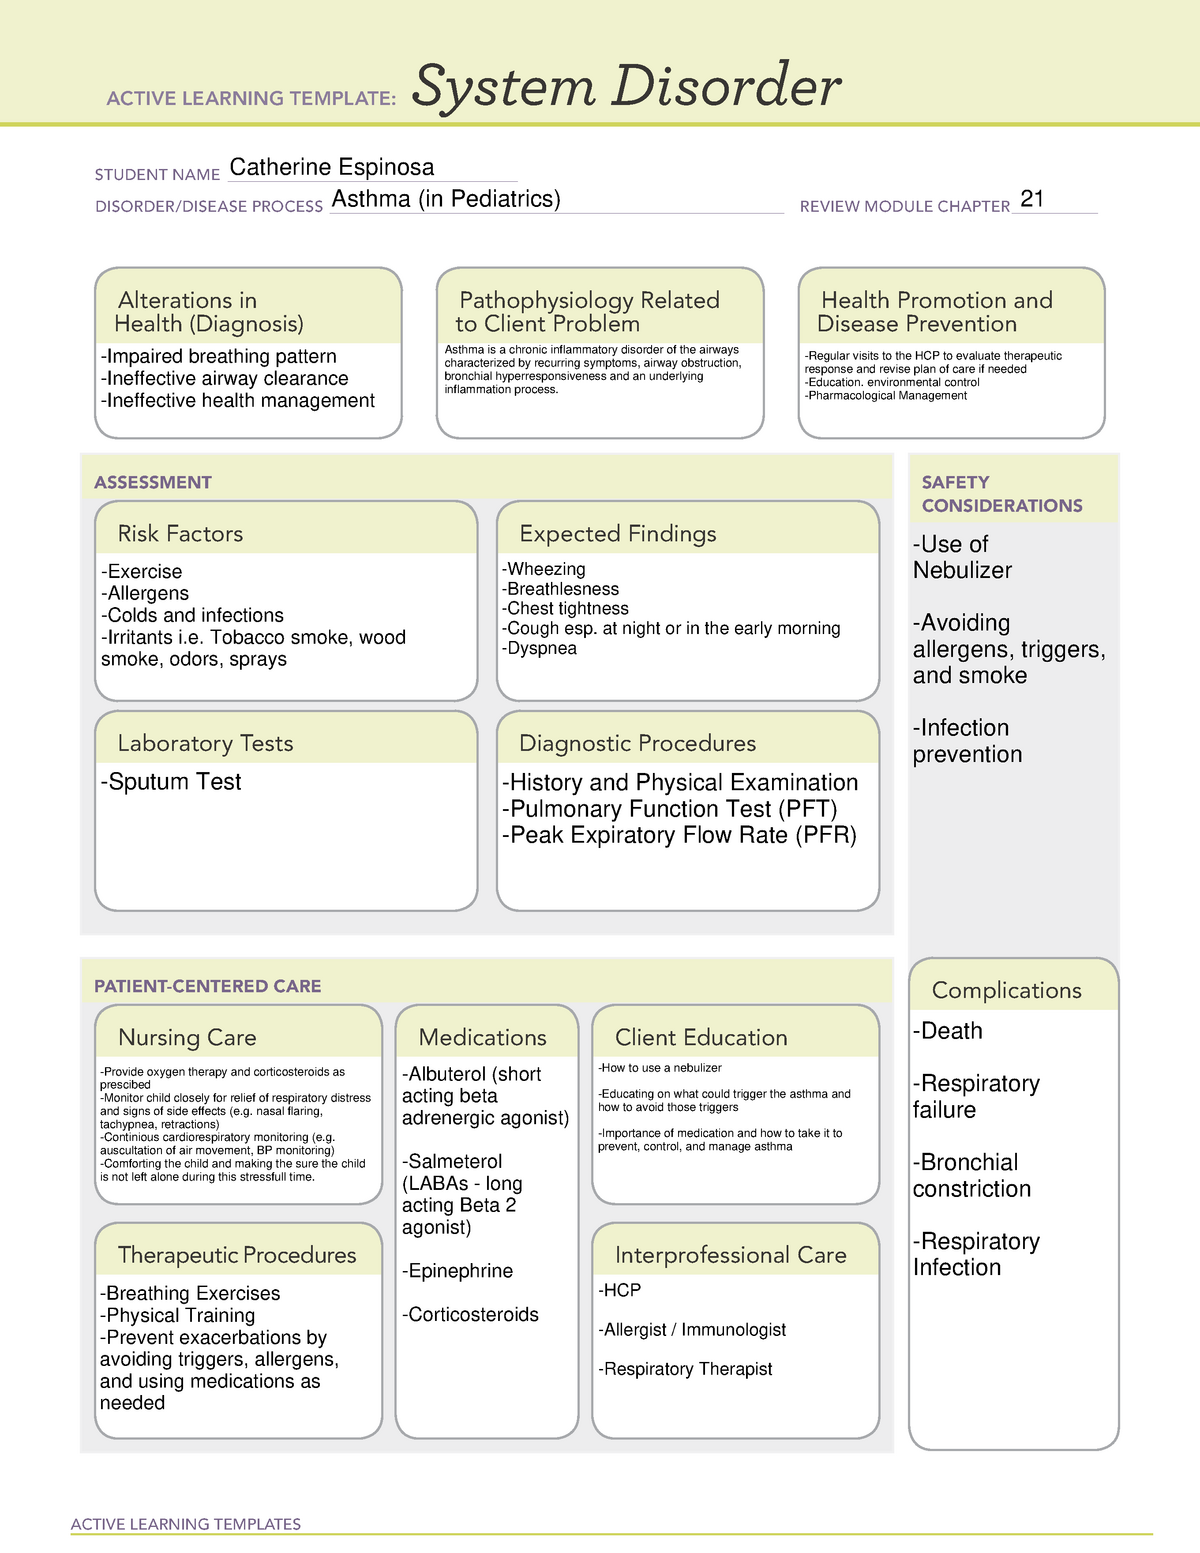 Asthma (Peds) System Disorder ACTIVE LEARNING TEMPLATES System